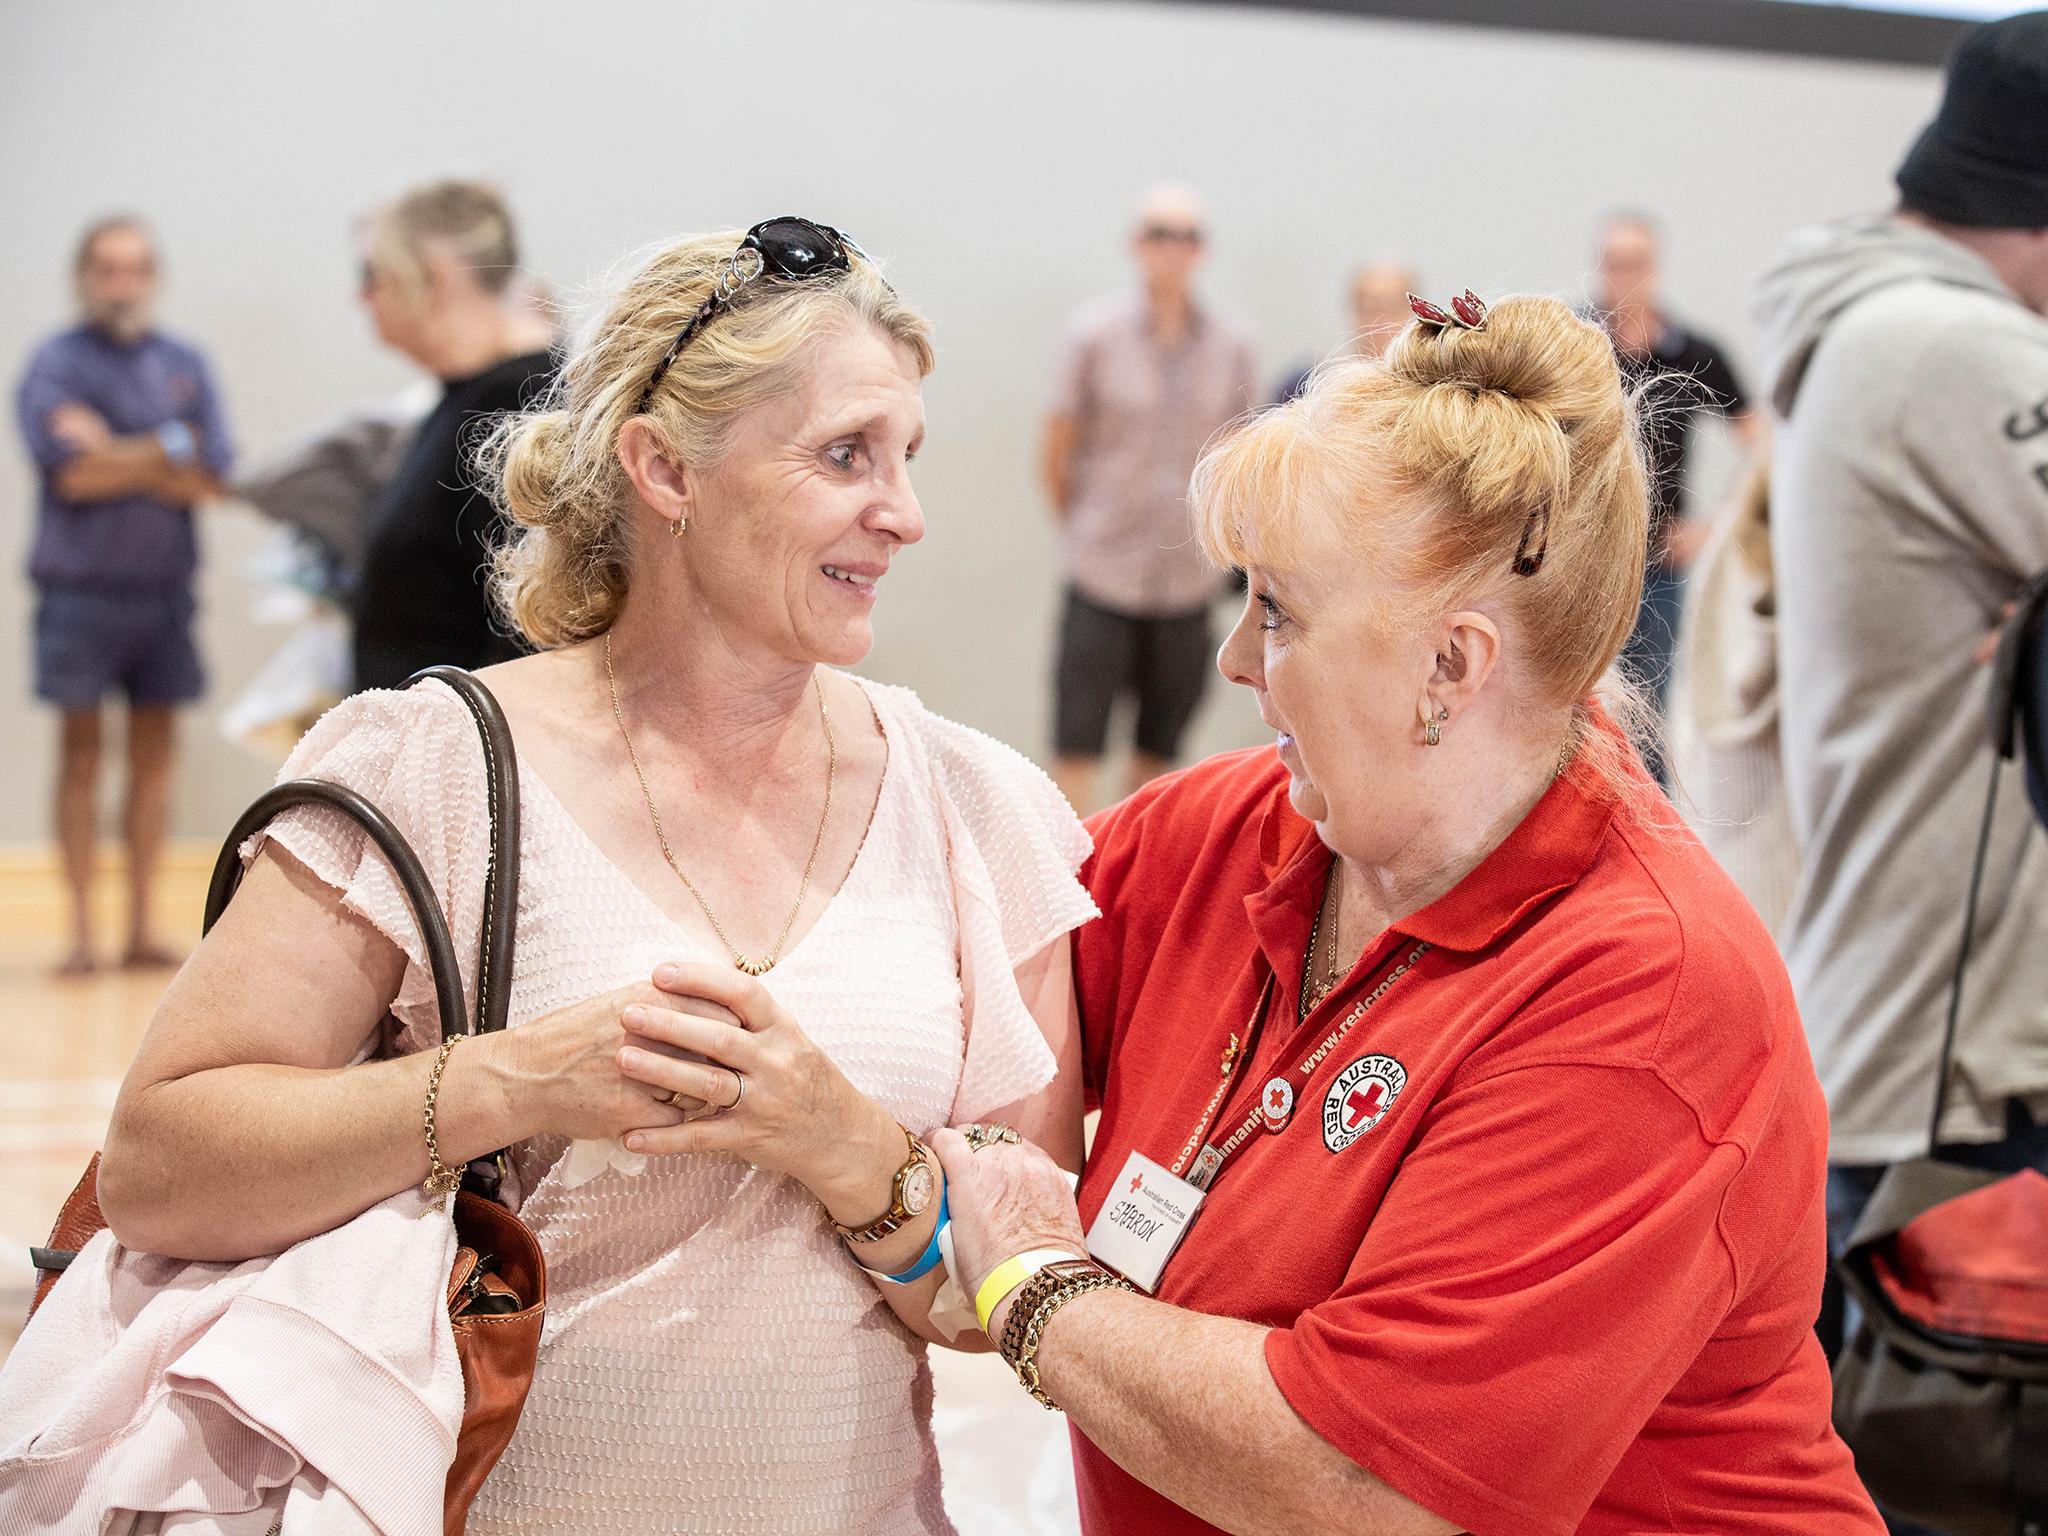 Members of the Australian Red Cross have been volunteering at evacuation centres in crisis-hit areas